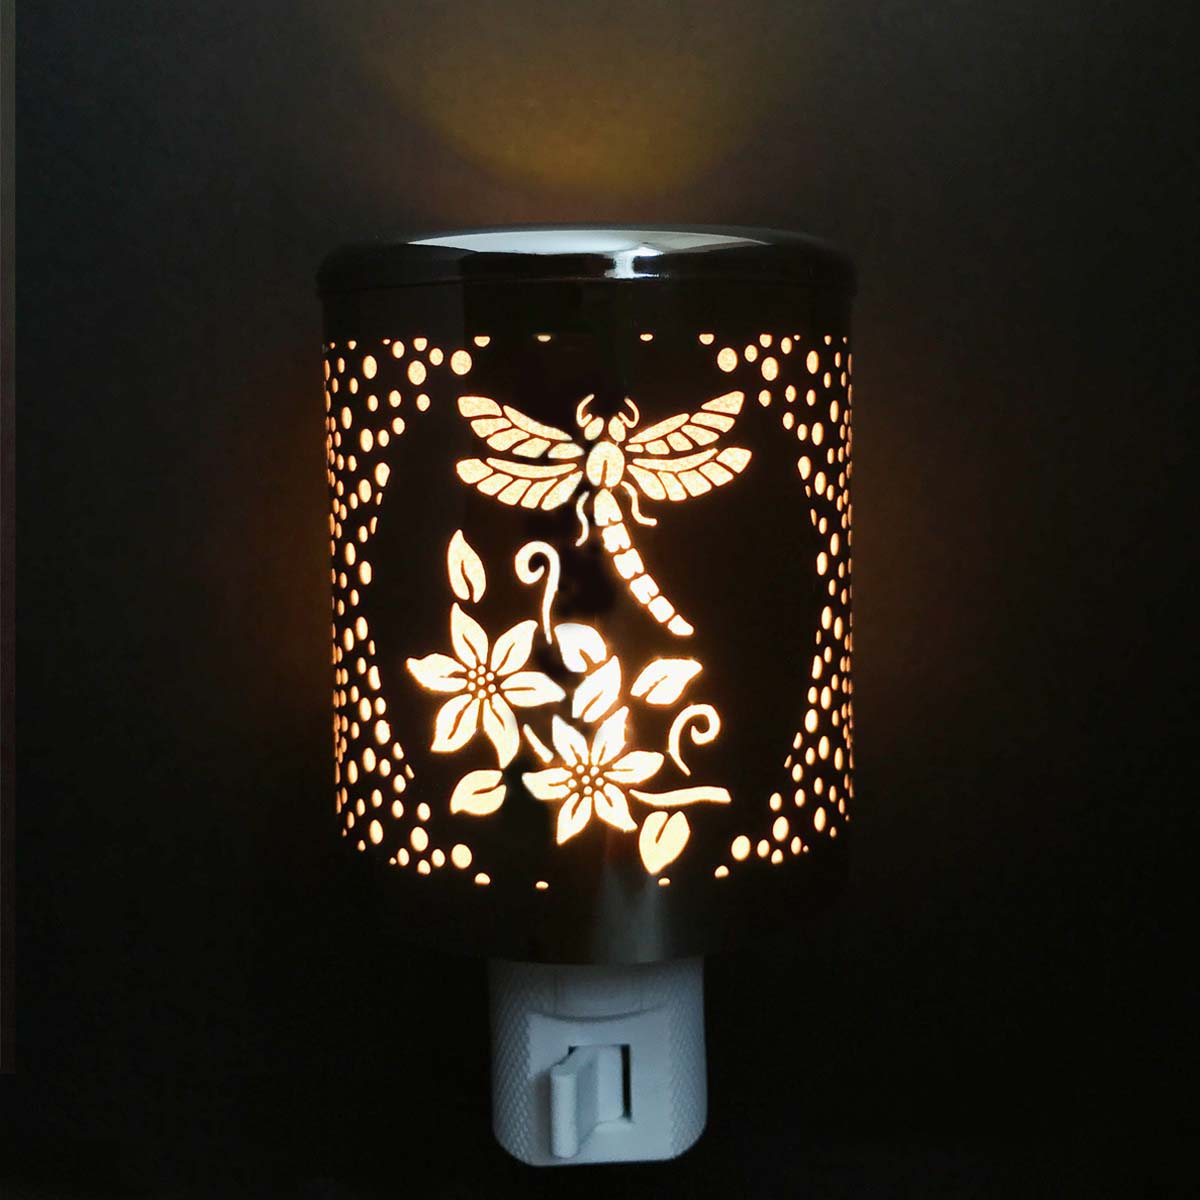 Nl 1110 Aluminum Crafted Led Night Light - Dragonfly